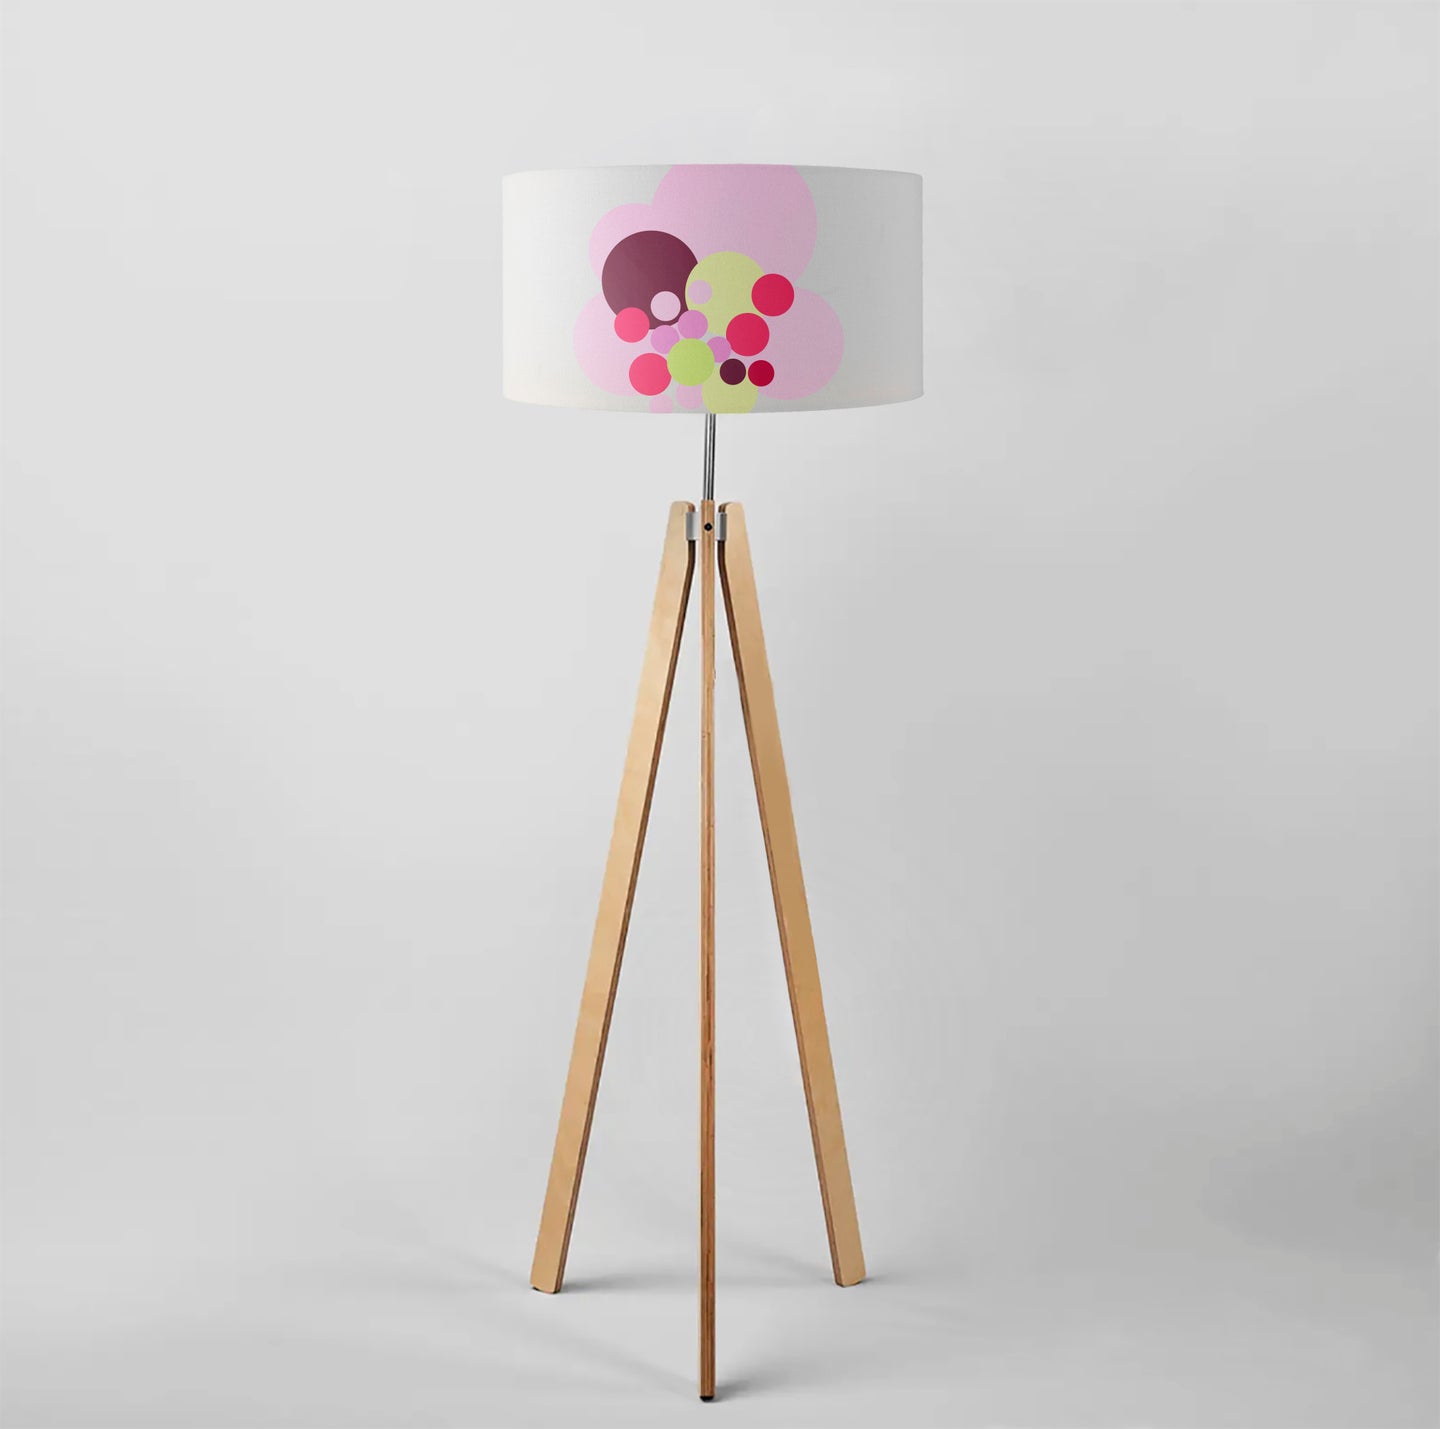 Geometric Abstract Bouquet of Rose Flowers drum lampshade, Diameter 40cm (16